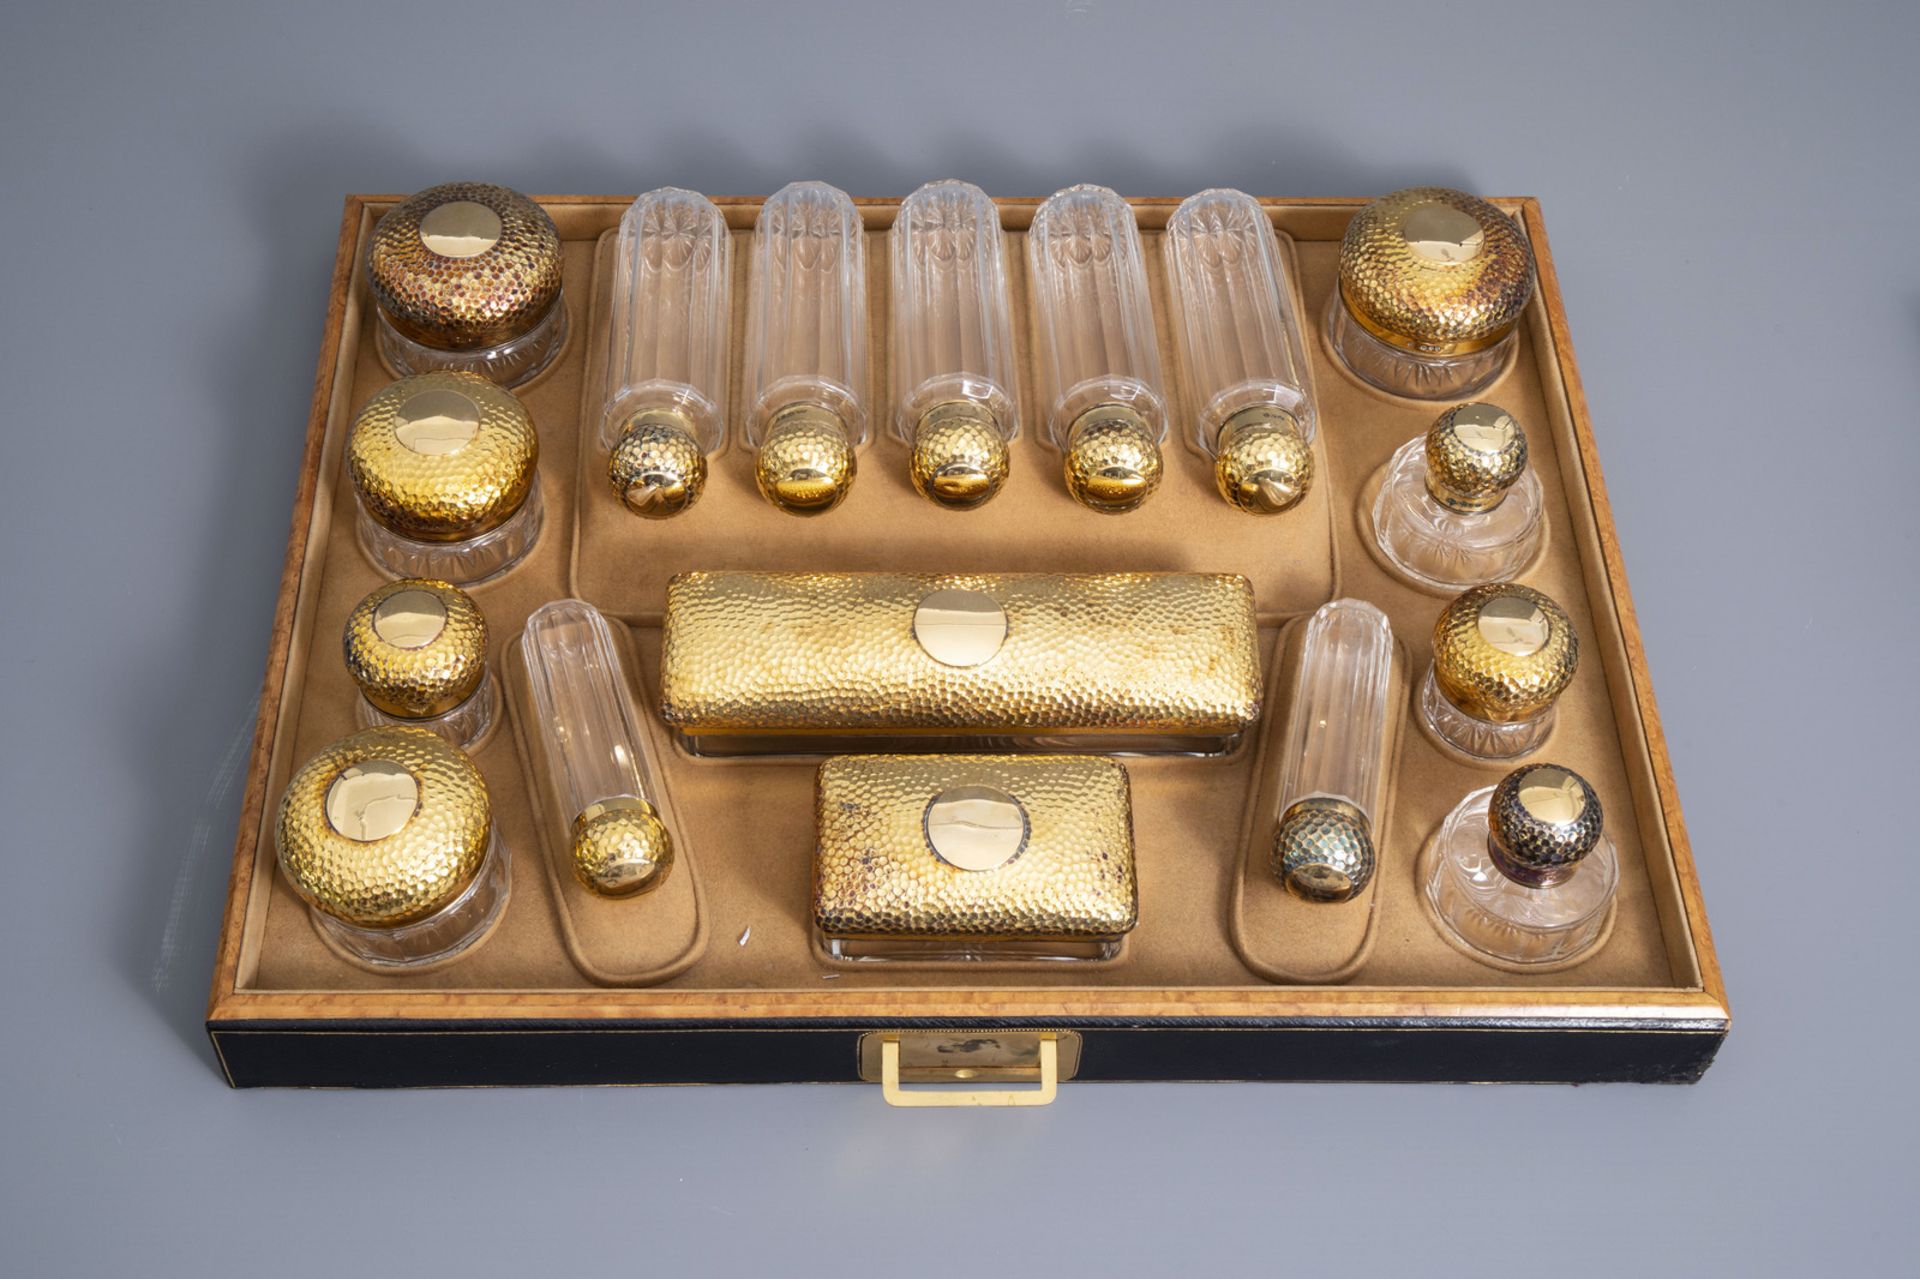 A comprehensive Victorian dressing case or dressing box, maker's mark Thomas Wimbush, London, dated - Image 4 of 25